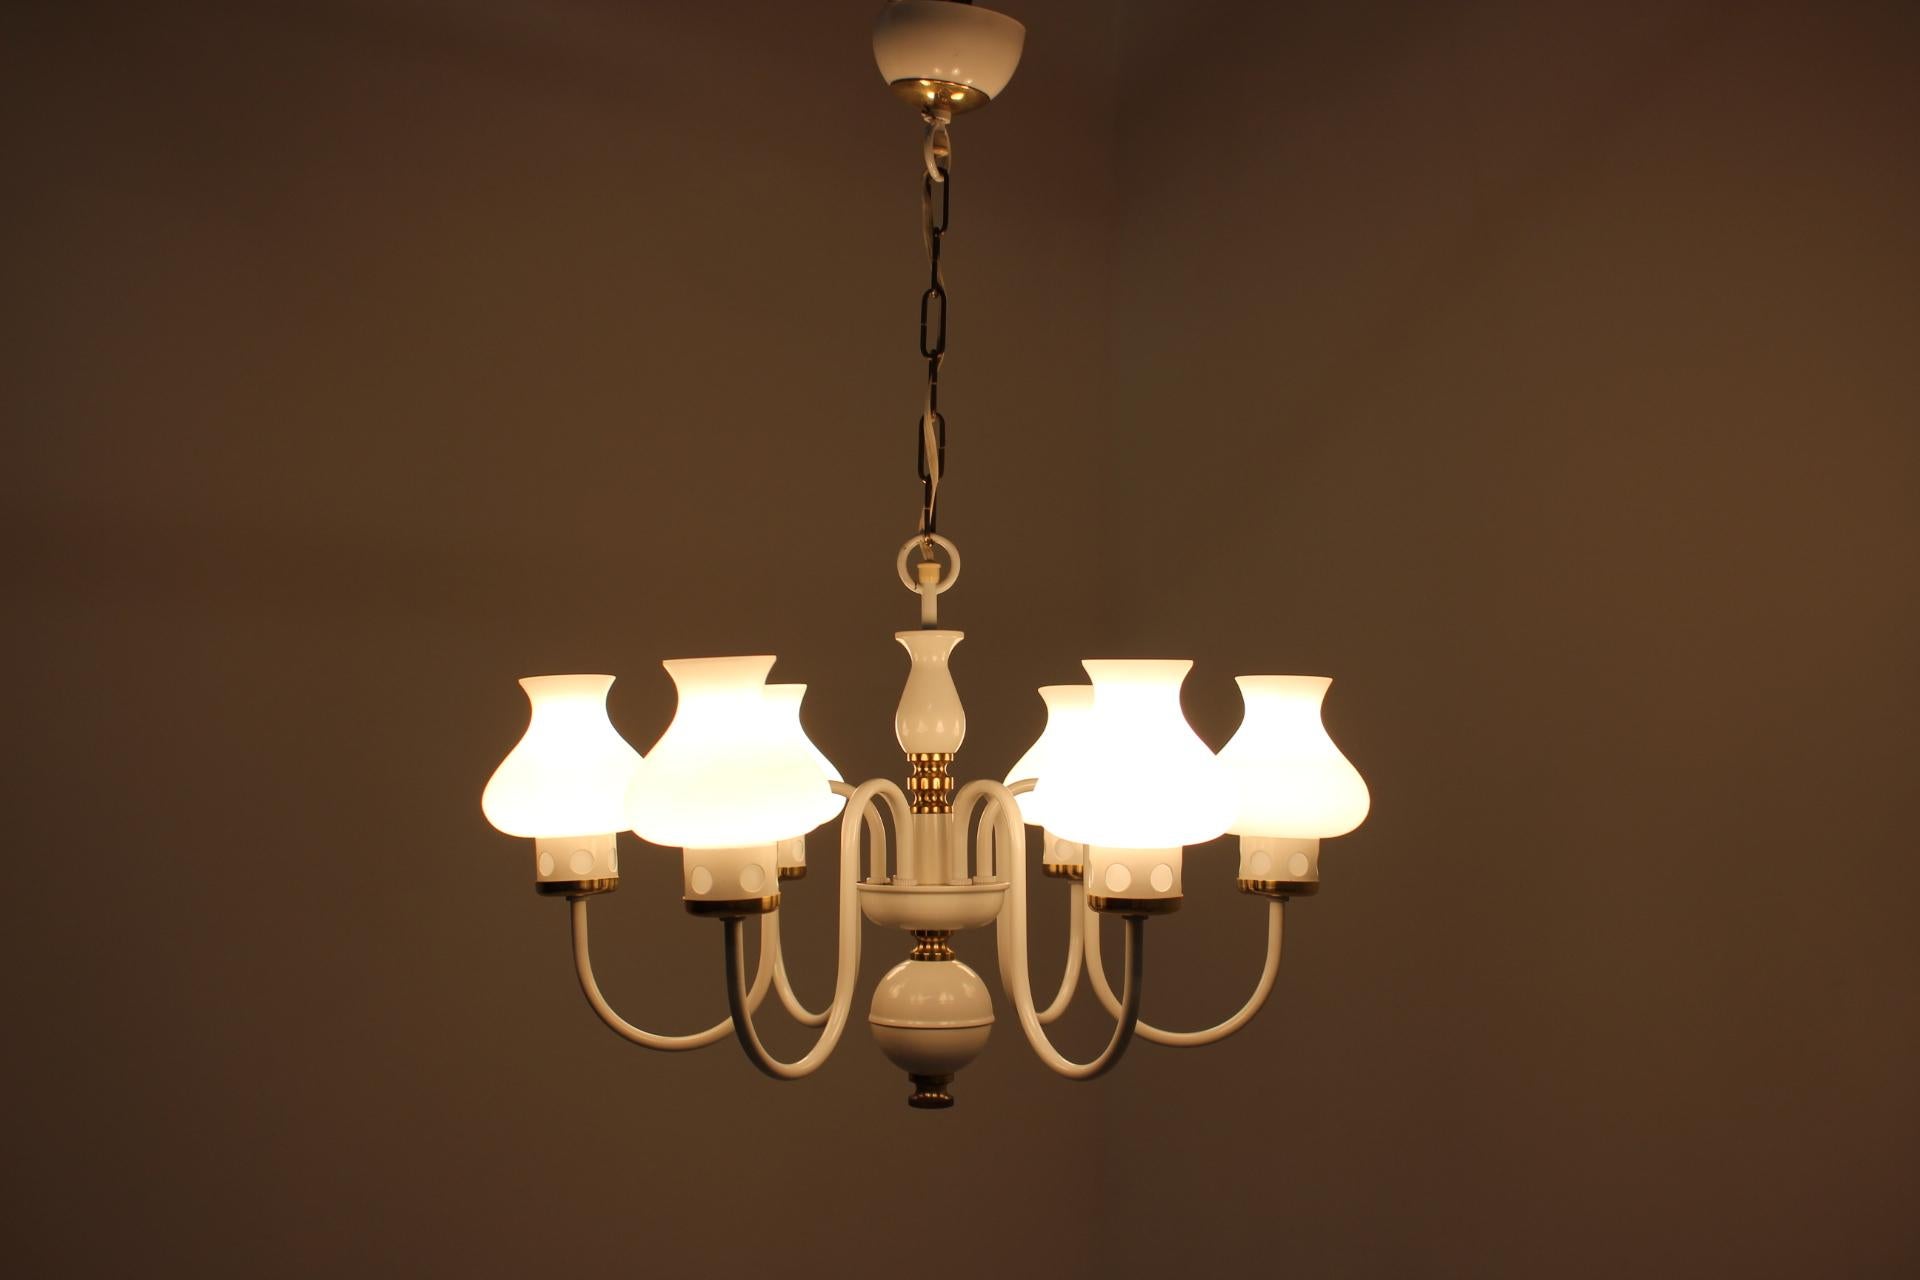 Mid-20th Century Midcentury White Chandelier, Lidokov, 1960s For Sale